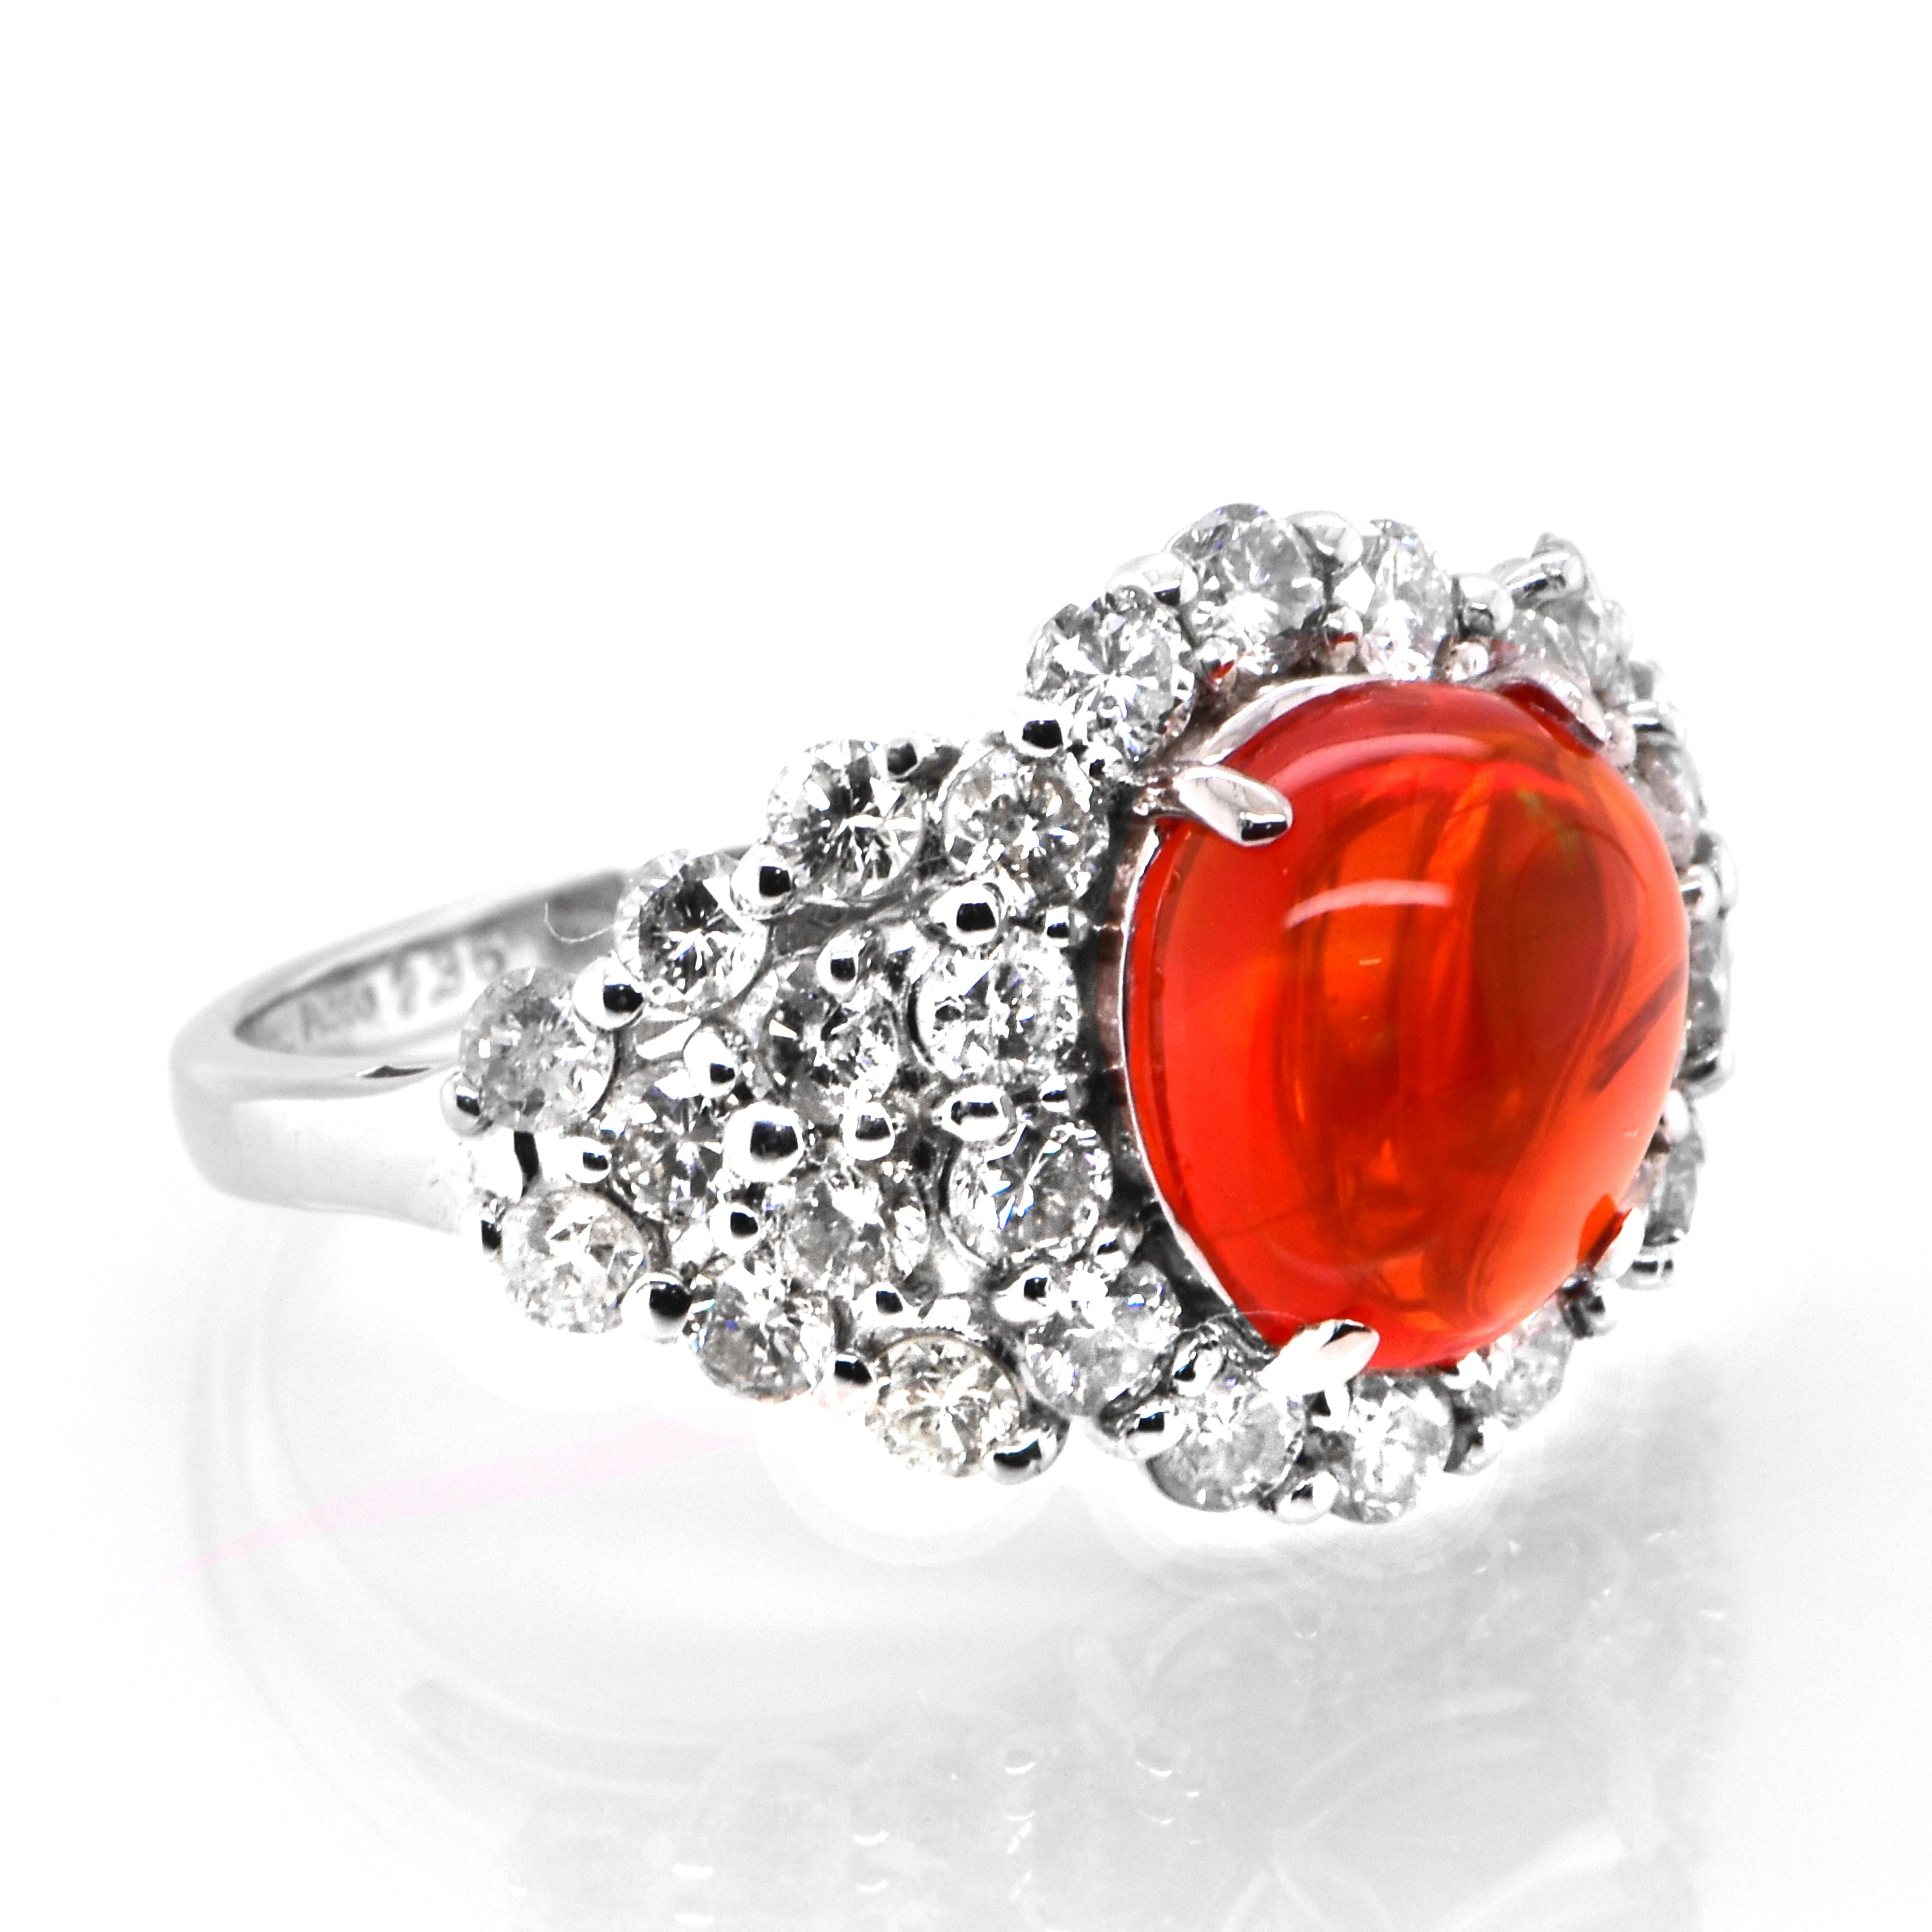 Modern 2.36 Carat Natural Mexican Fire Opal and Diamond Cocktail Ring Set in Platinum For Sale